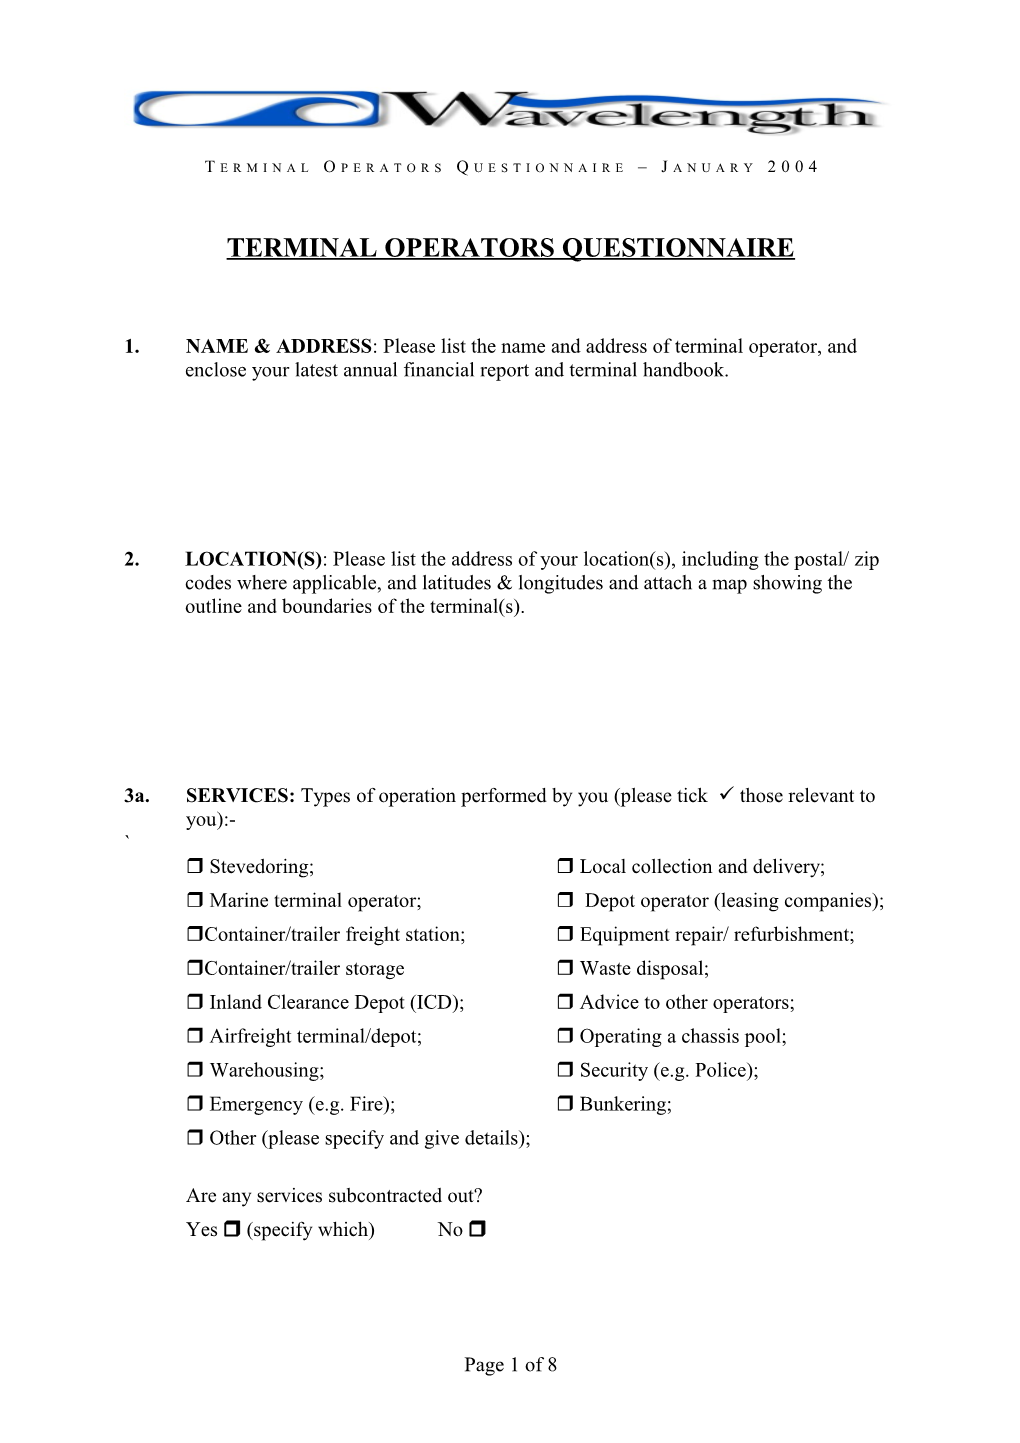 Terminal Operators Questionnaire January 2004